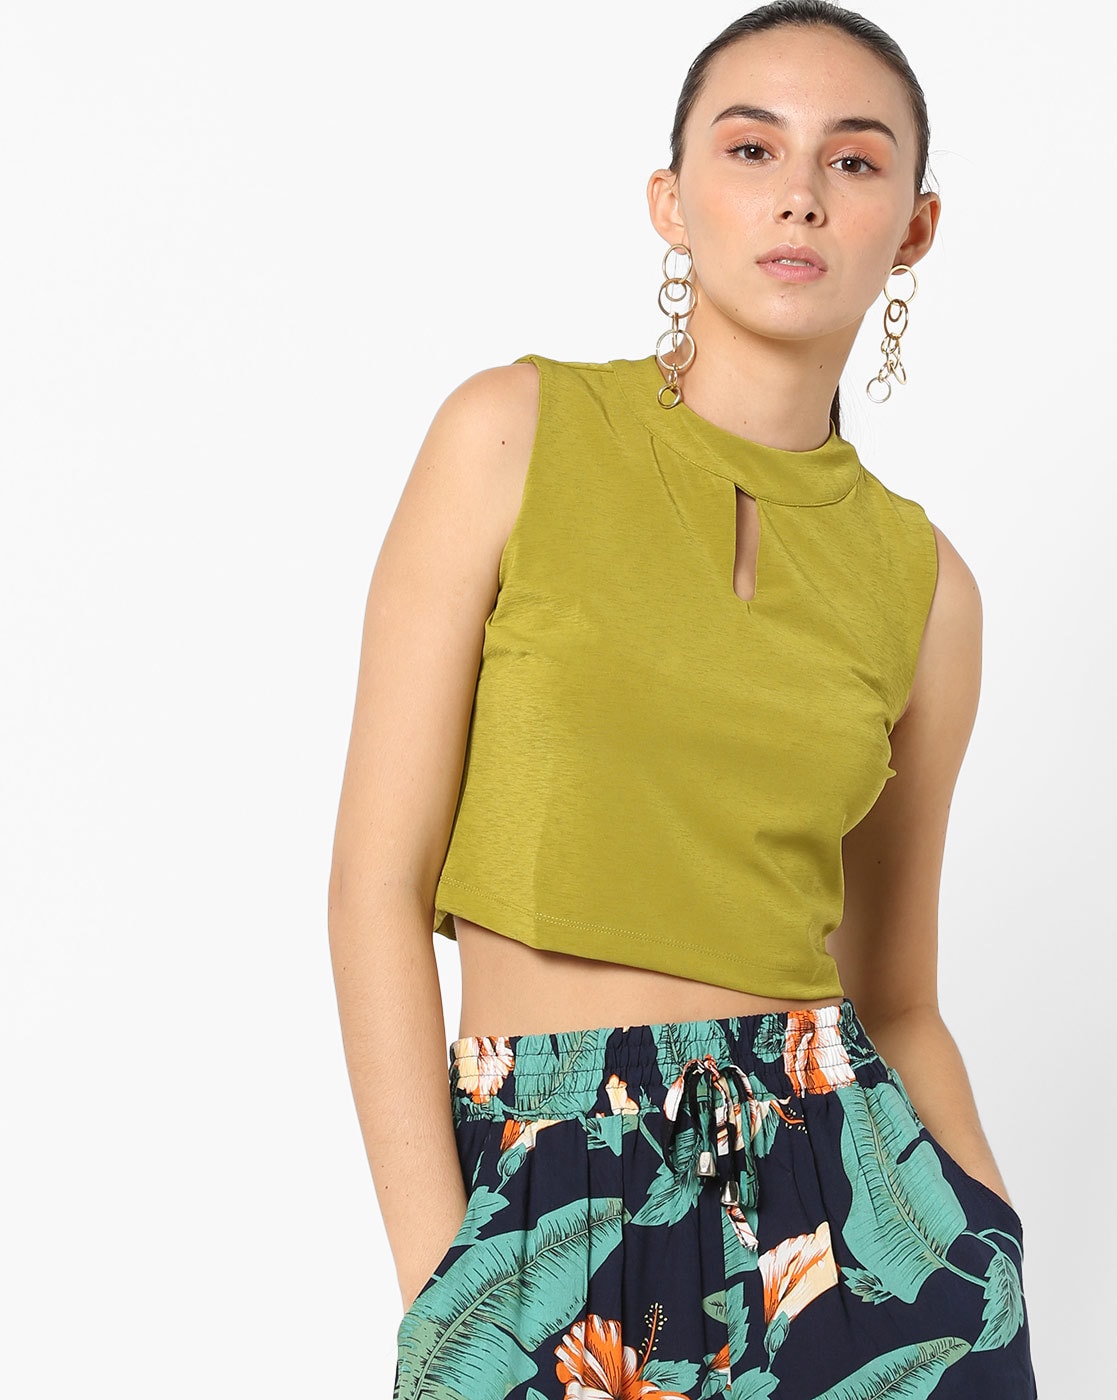 lime green high neck top